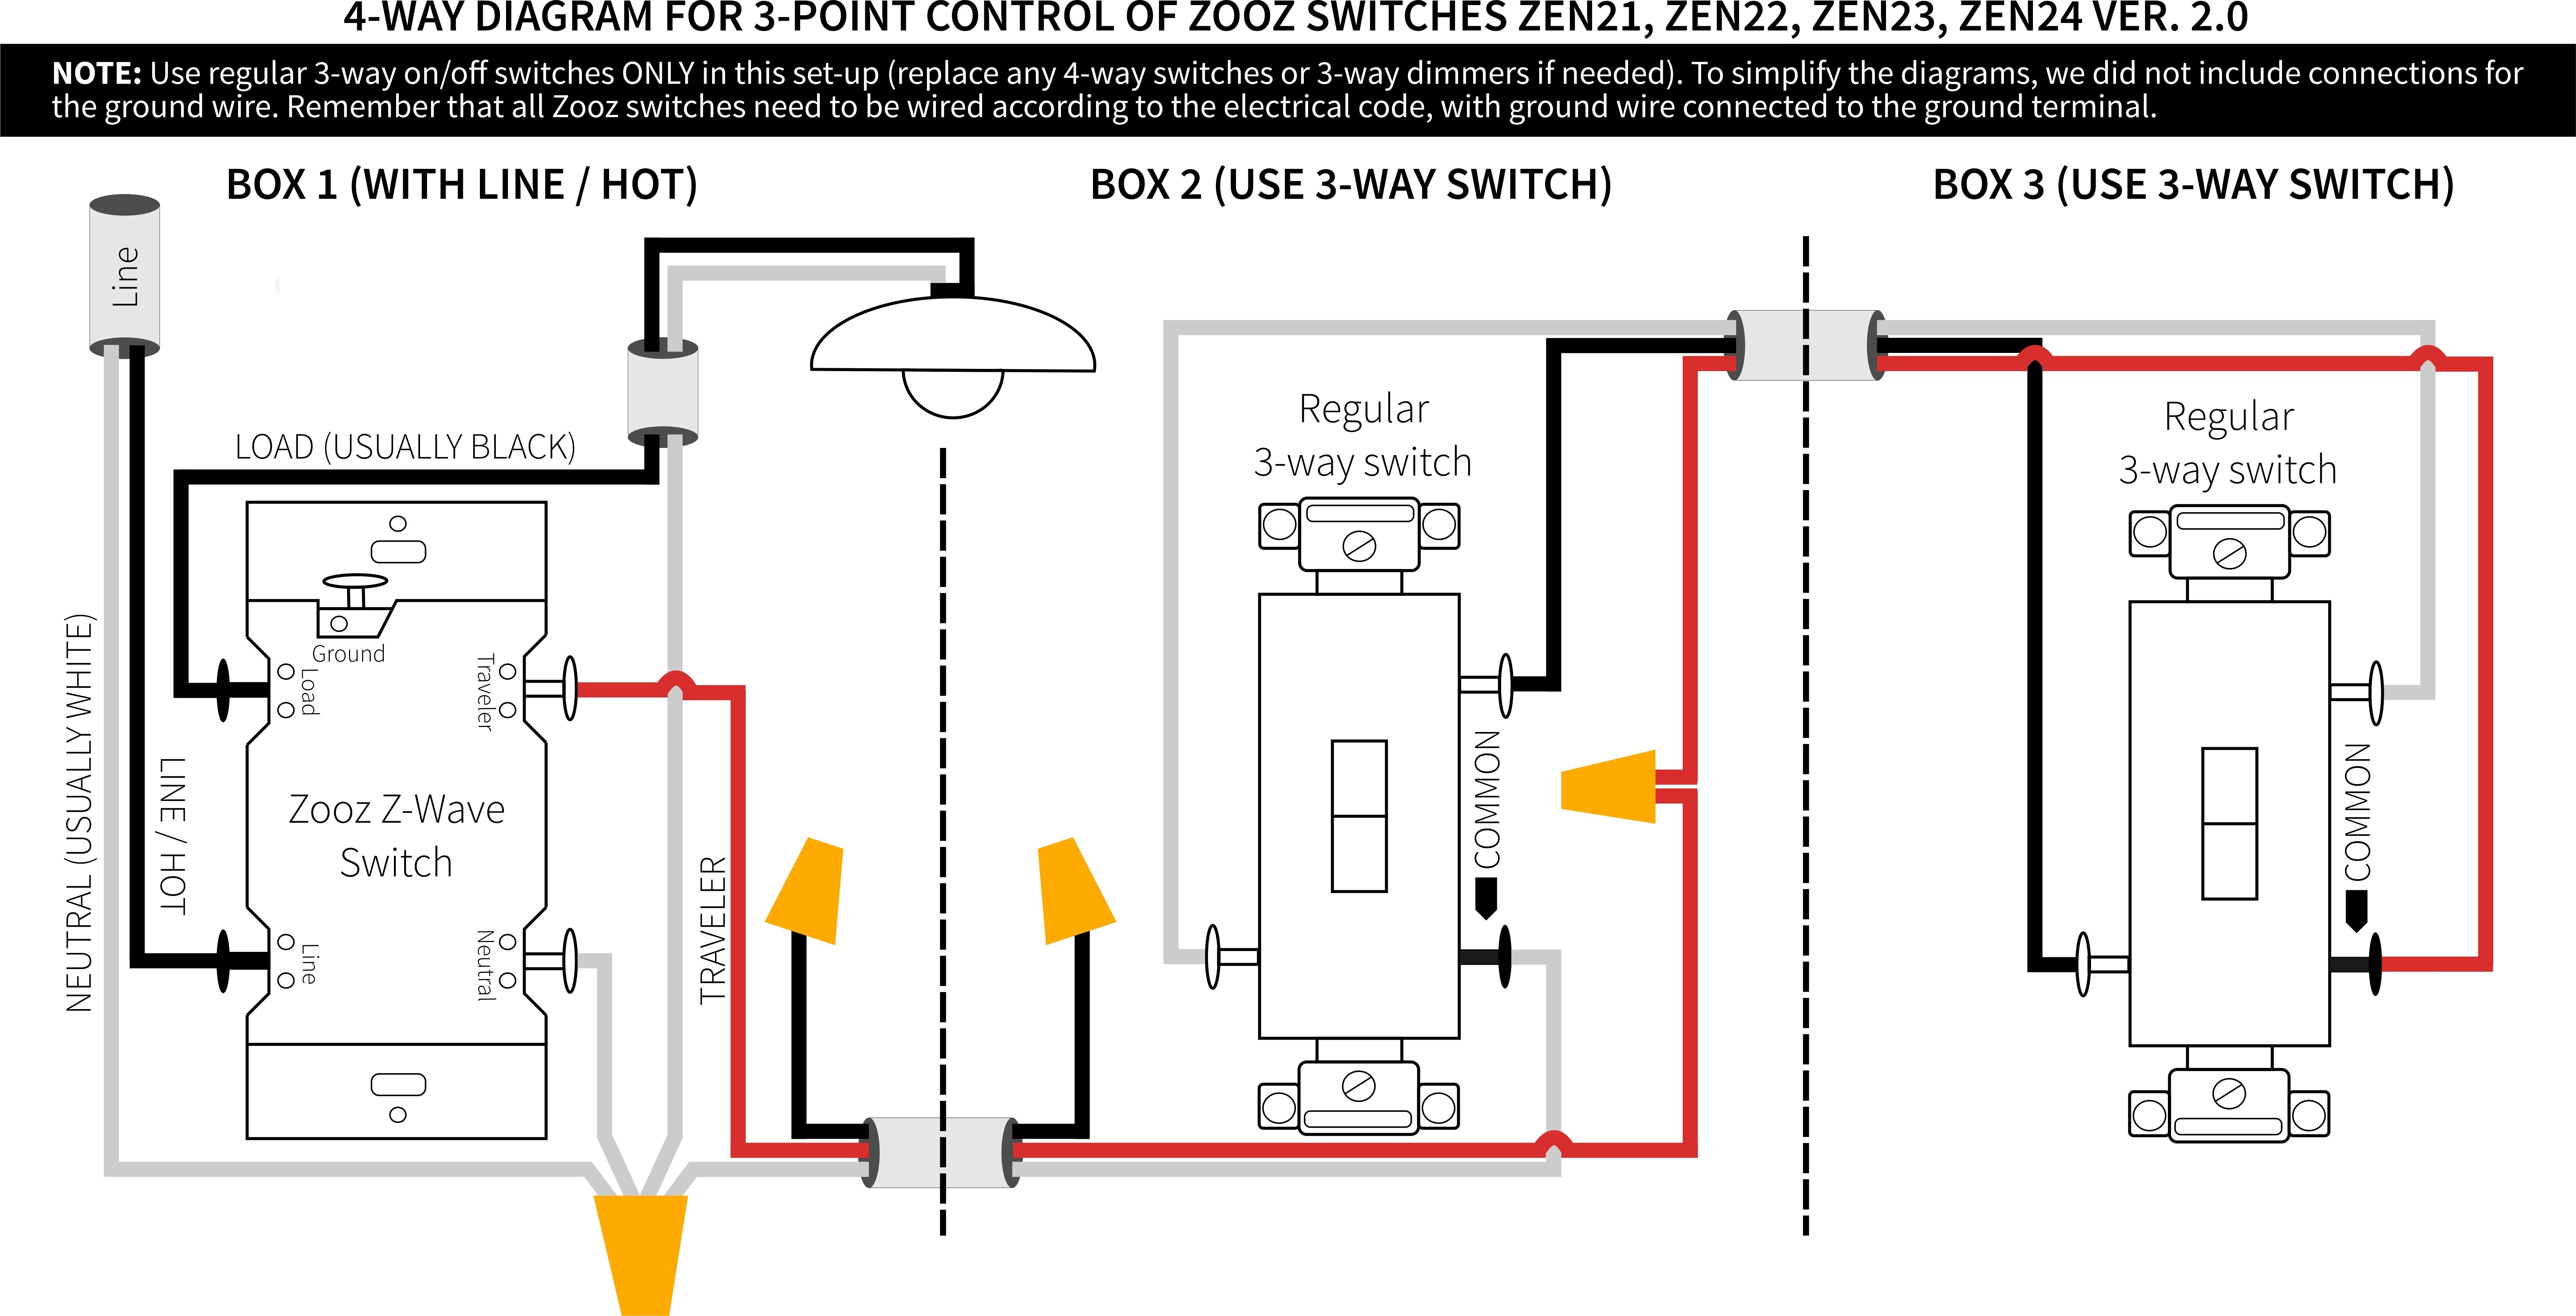 Valid Wiring Diagram for Dimmer Switch Australia – Wiring Diagram